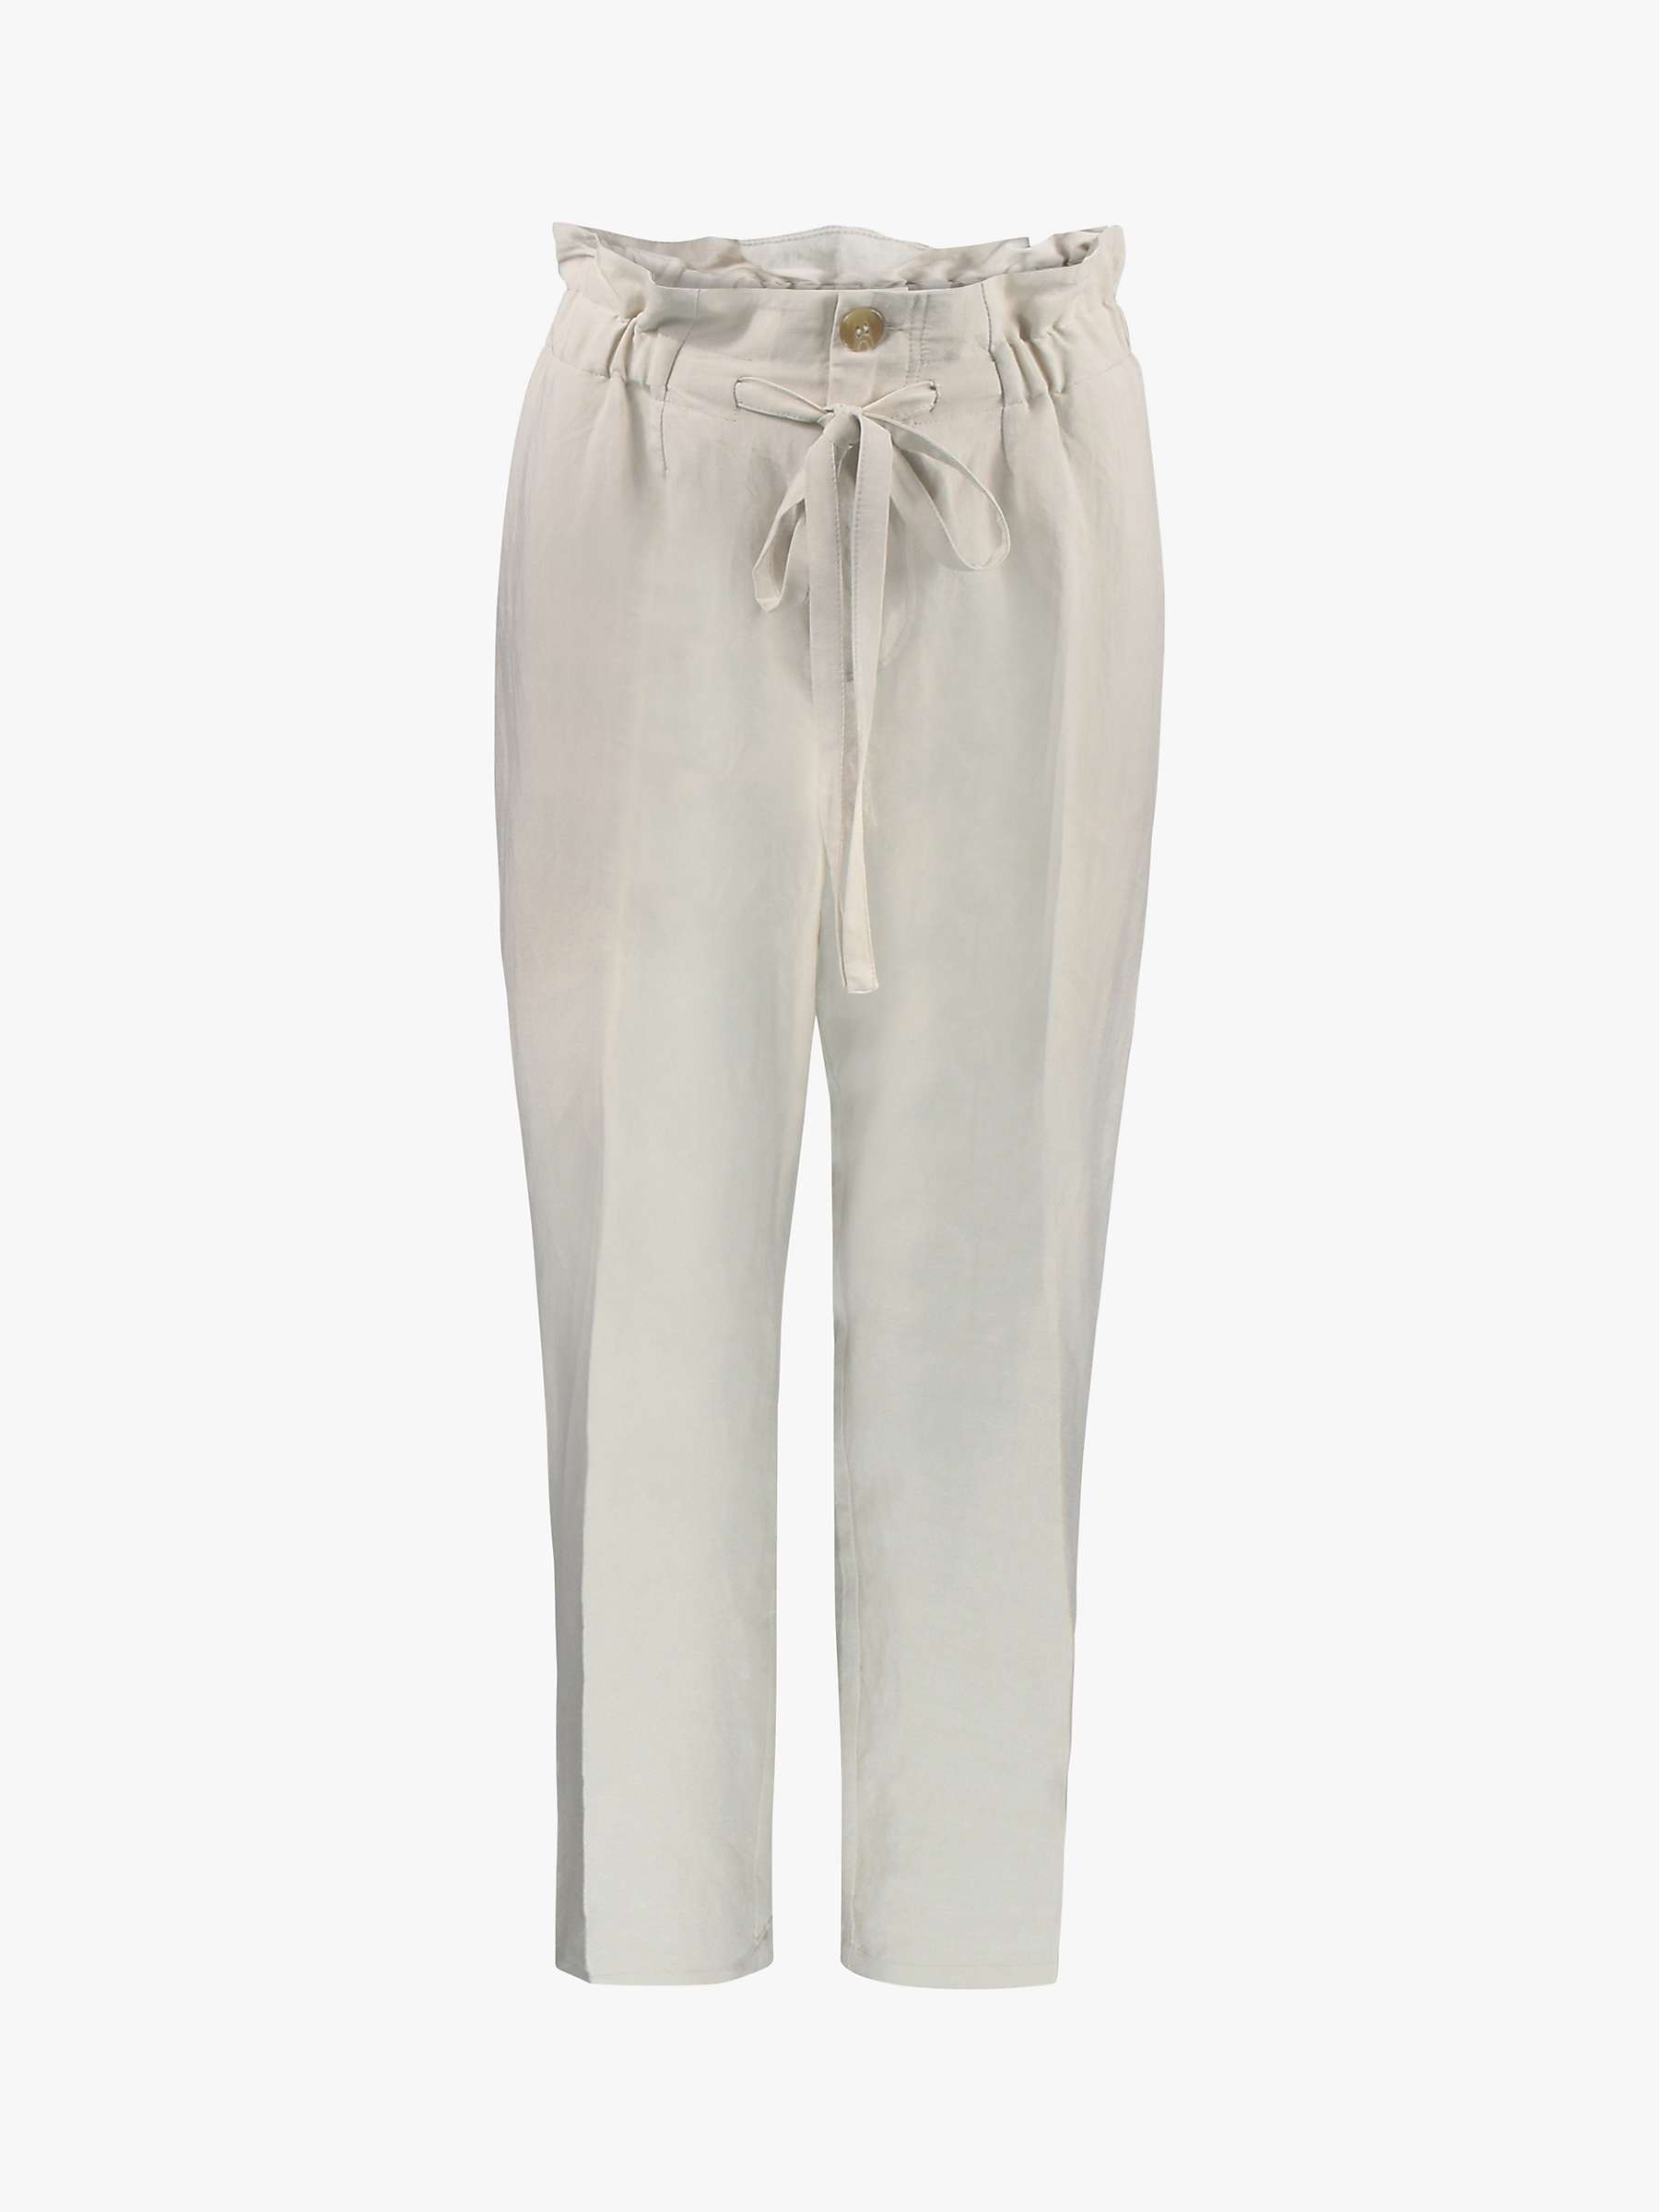 Ro&Zo Tapered Paperbag Trousers, Sand at John Lewis & Partners